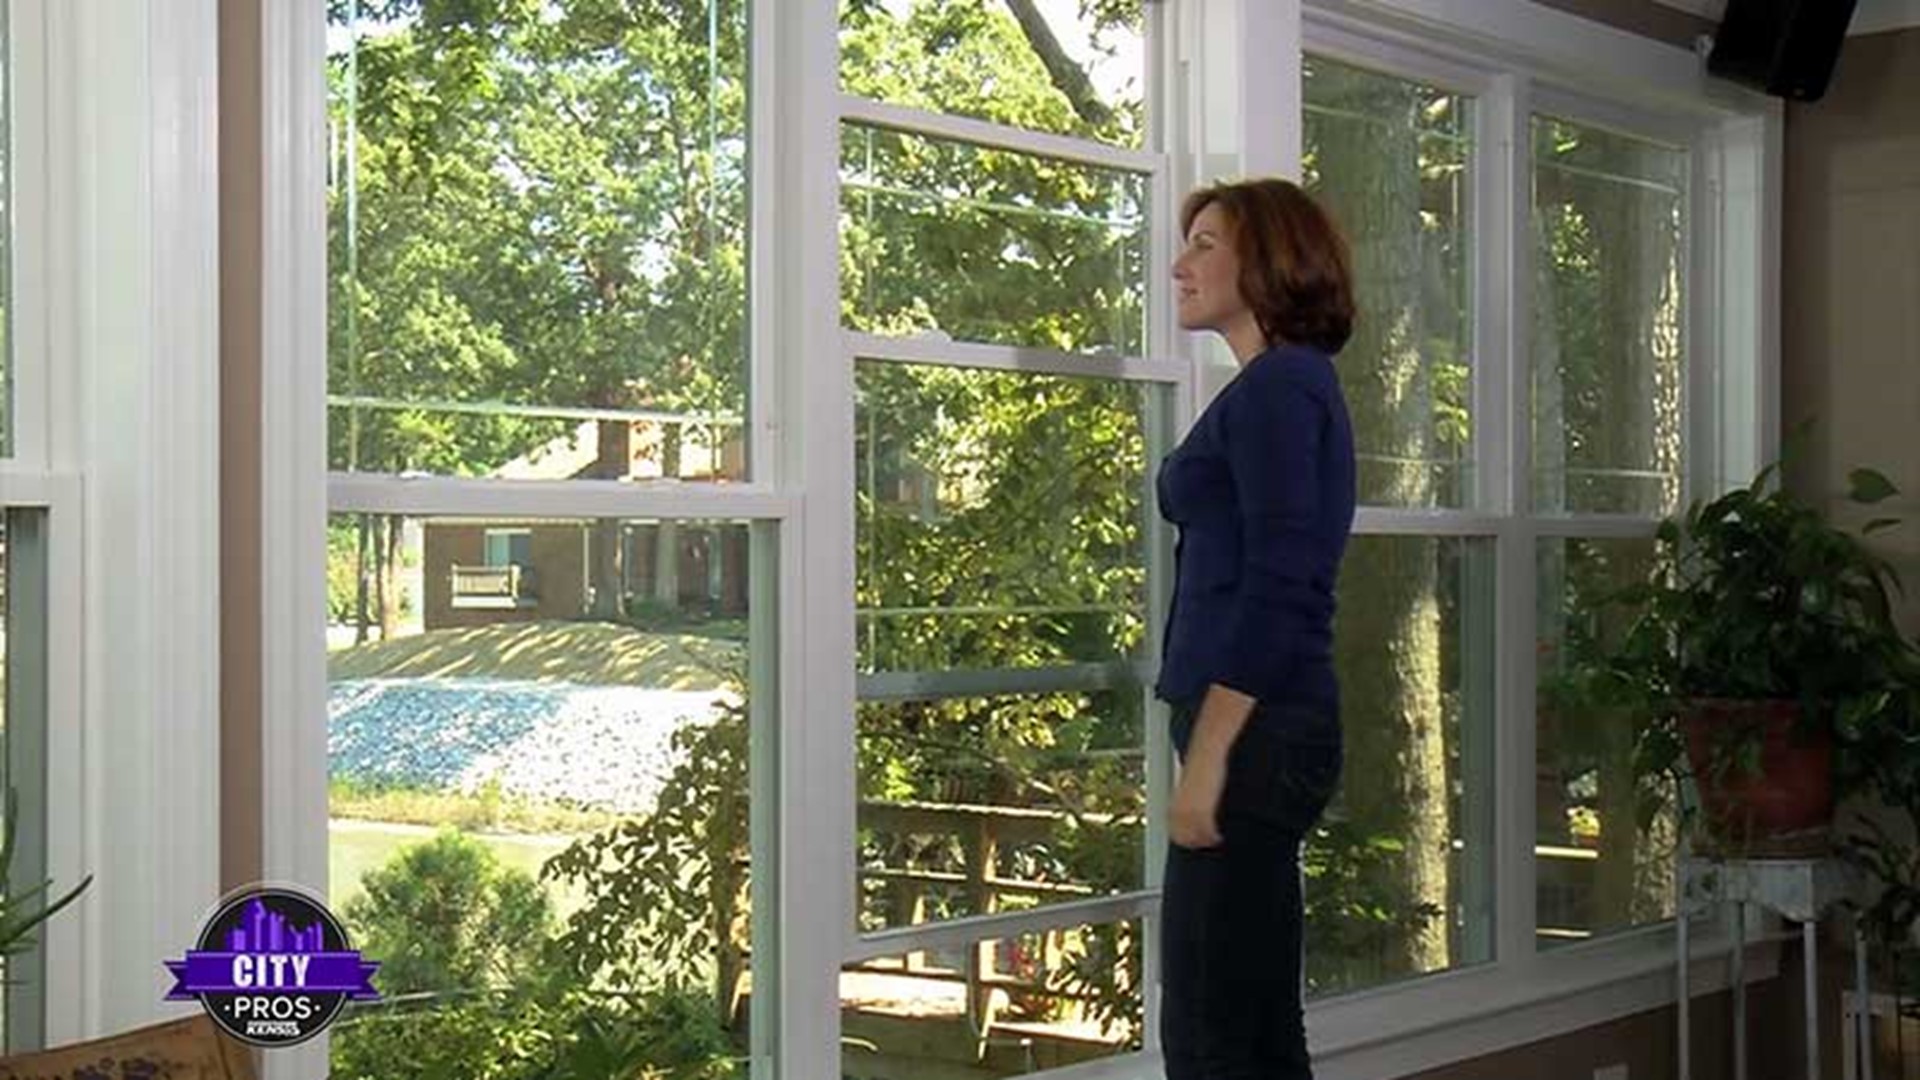 Window World is a trusted window replacement company with over 20,000 windows sold and installed in San Antonio each year.